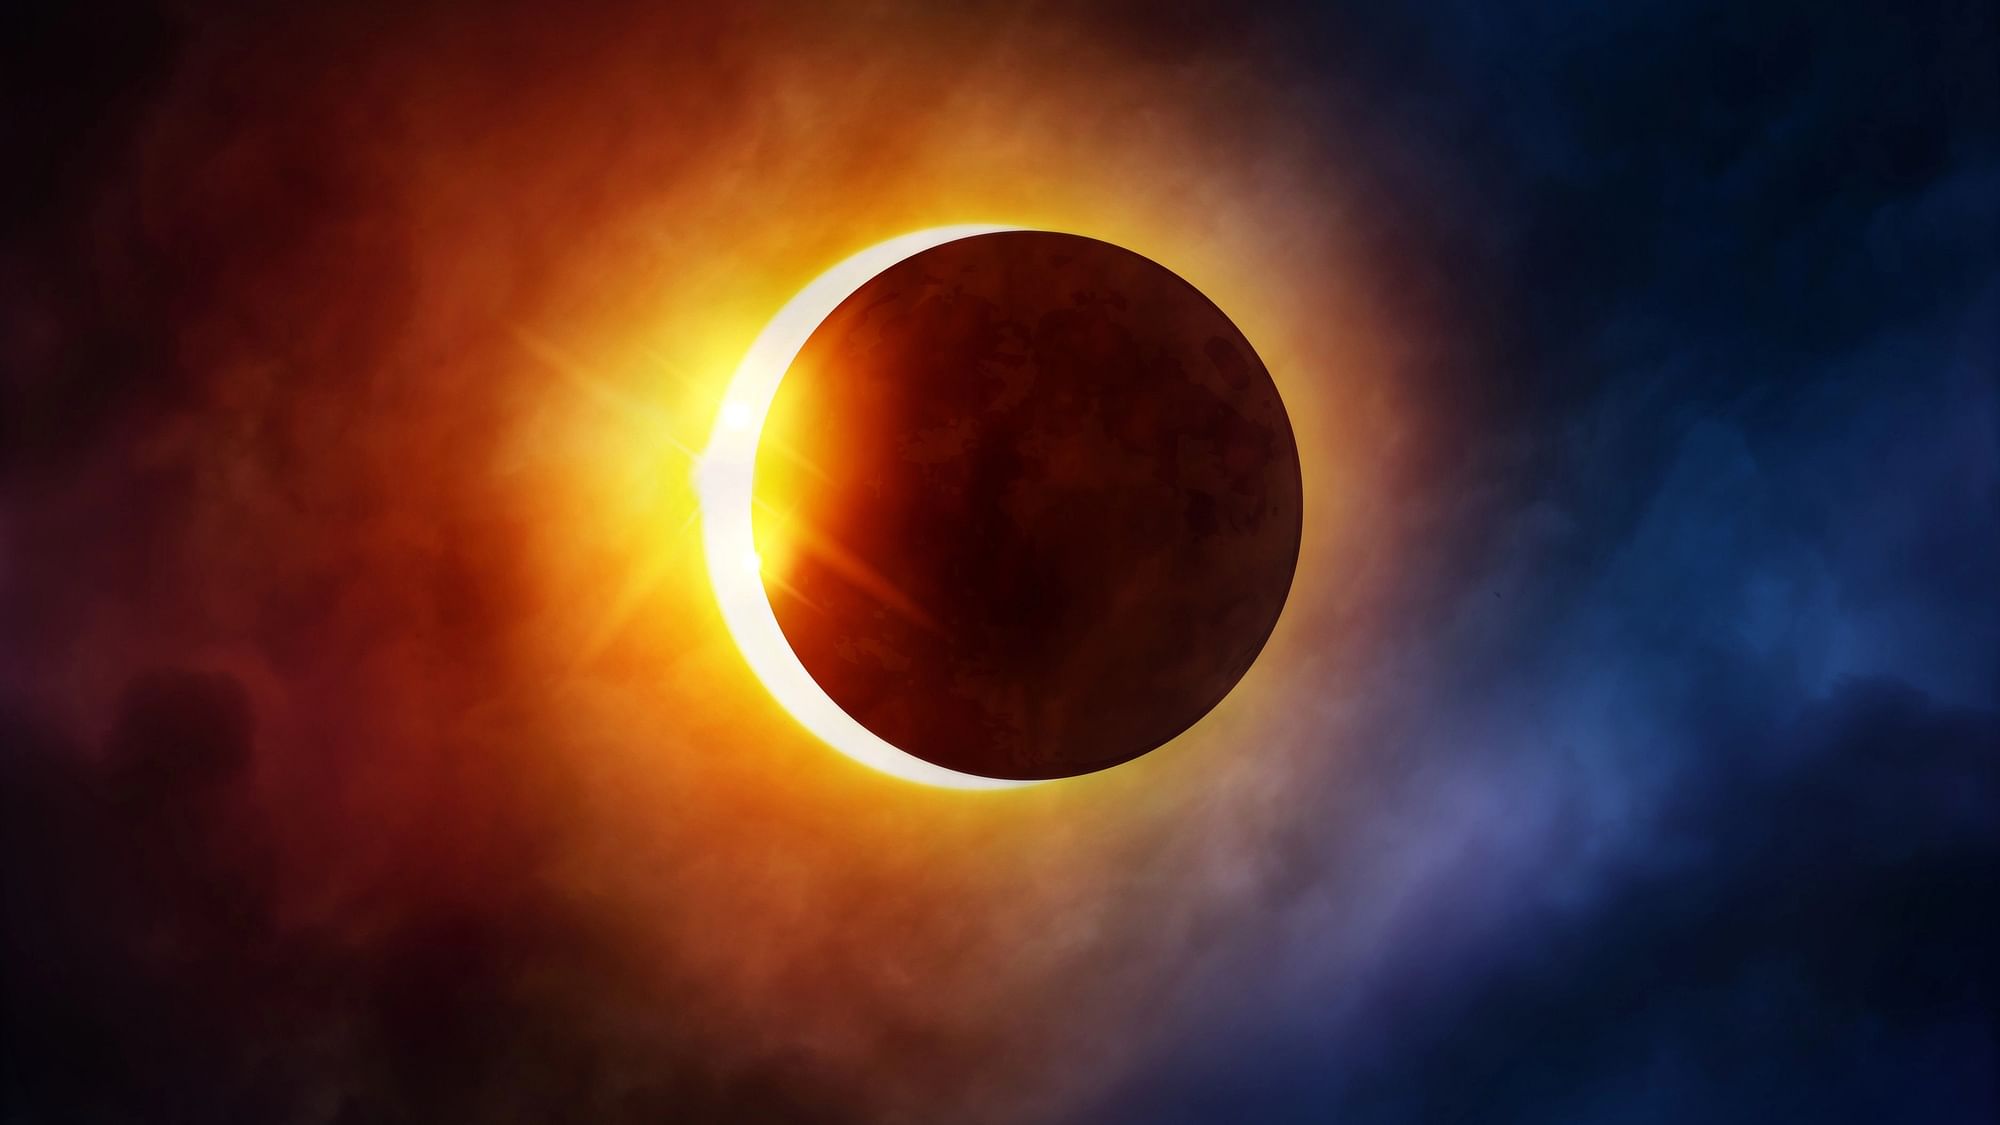 Get ready to photograph two total solar eclipses this year